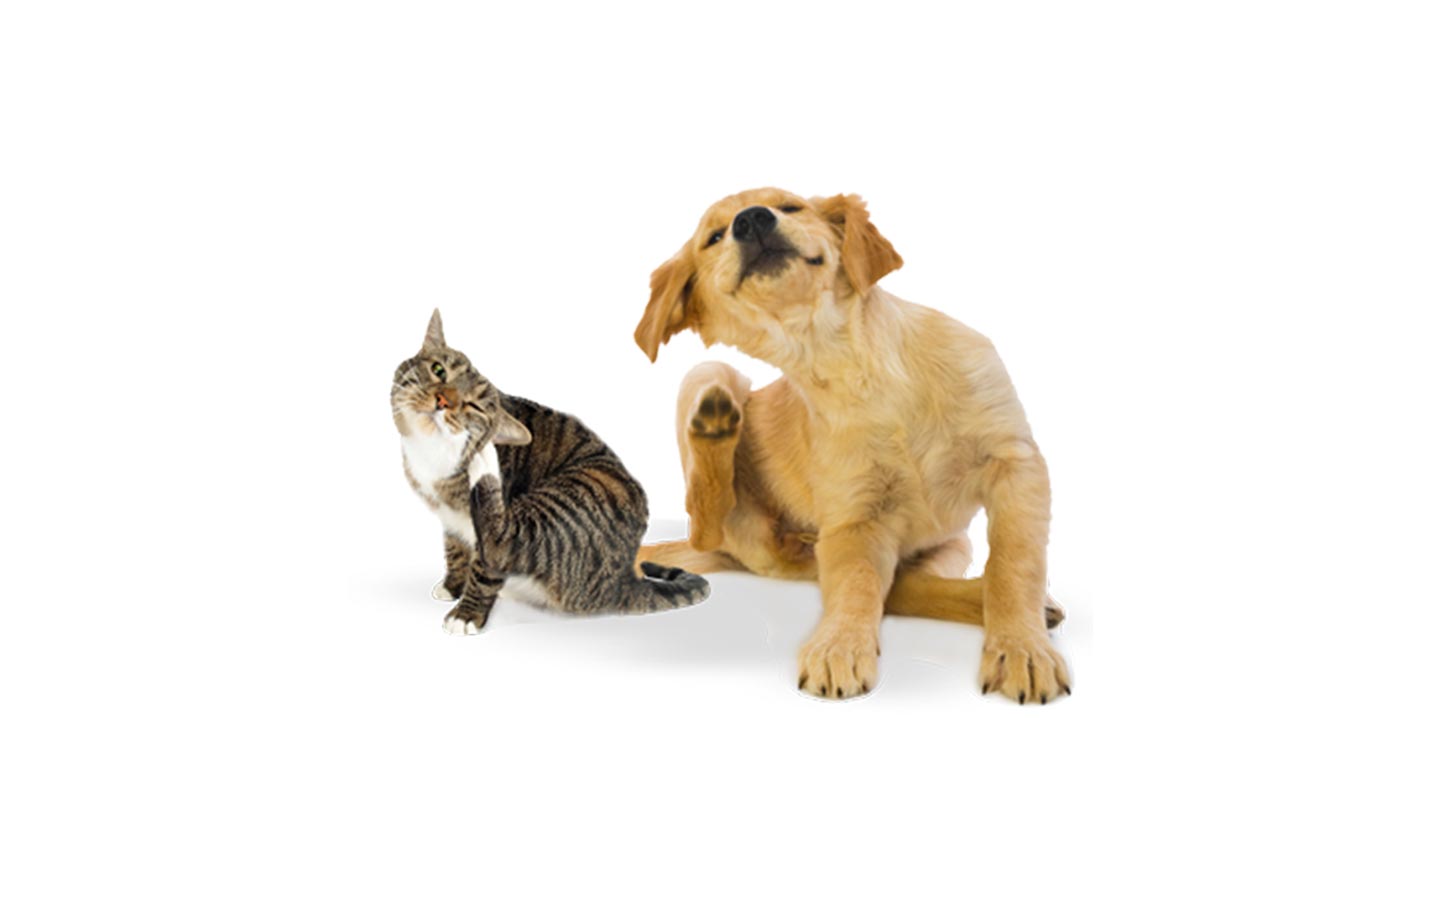 Nohl Ranch Animal Hospital in Orange, CA | Offer- Coupon | 10% OFF Flea & Tick Prevention